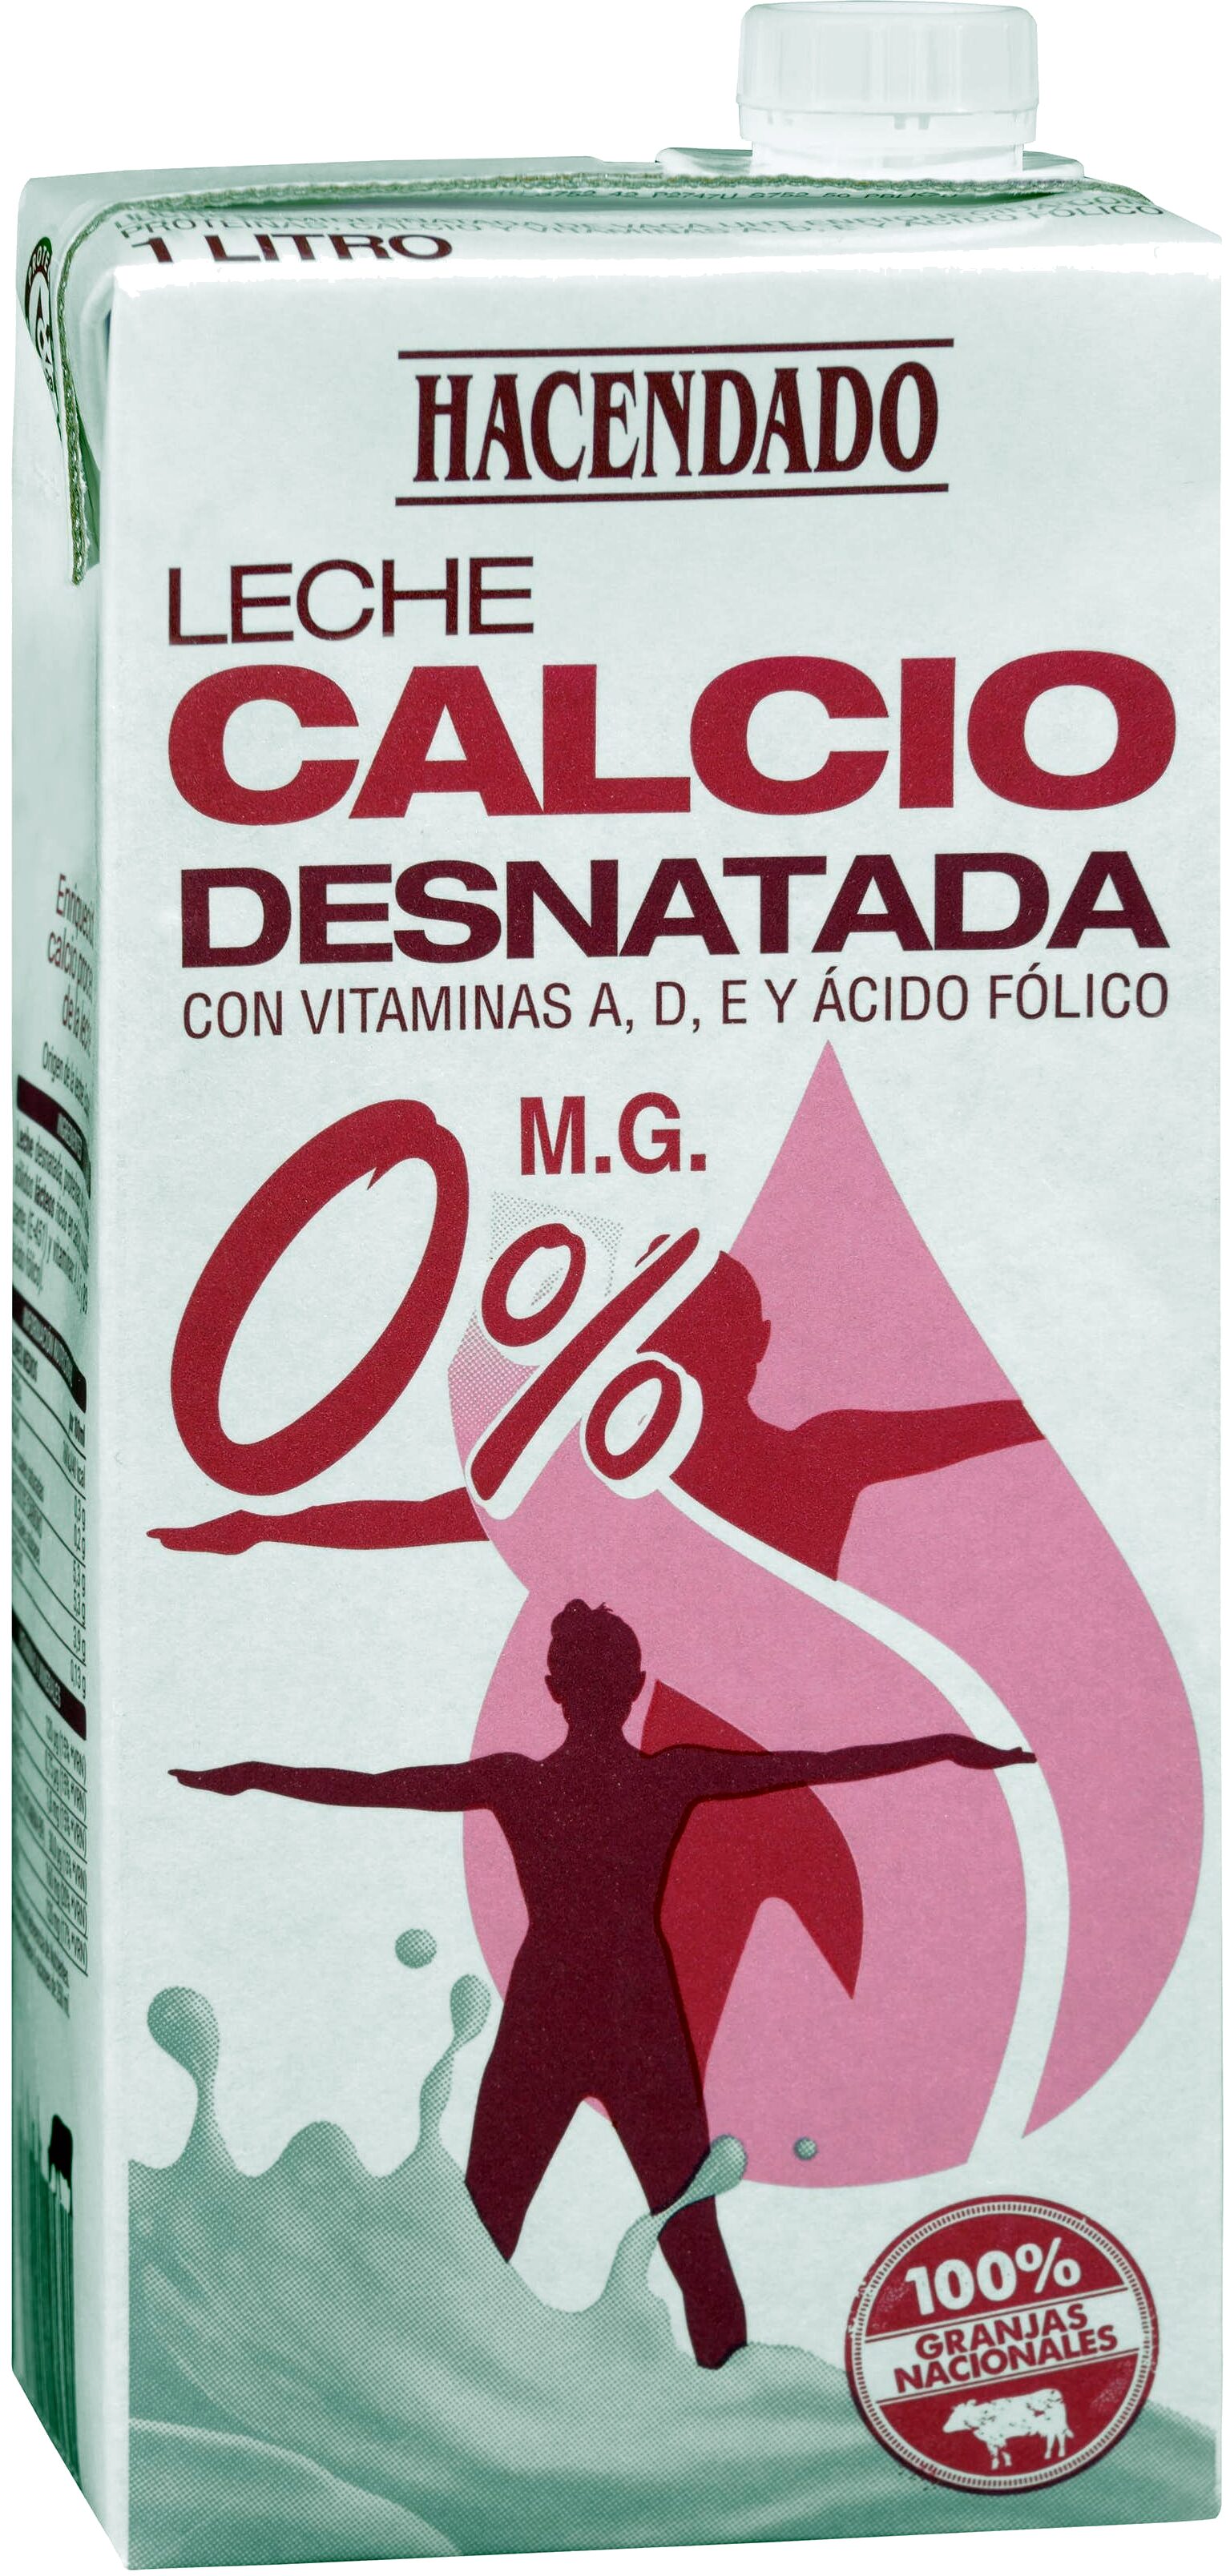 Leche calcio desnatada - Recycling instructions and/or packaging information - es